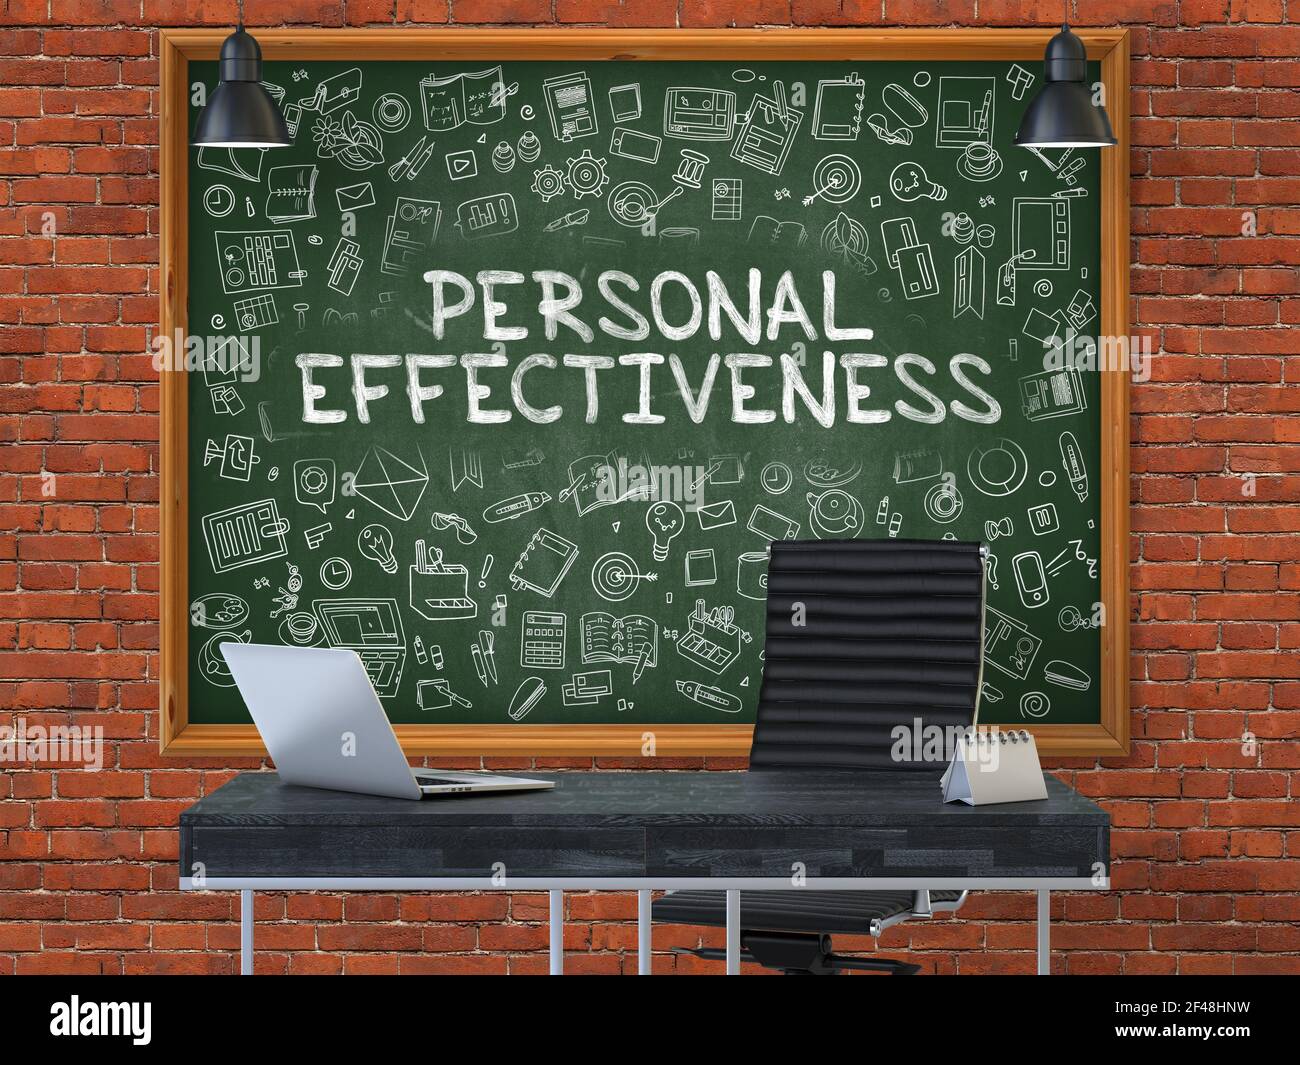 Personal Effectiveness - Hand Drawn on Green Chalkboard in Modern Office Workplace. Illustration with Doodle Design Elements. 3D. Stock Photo